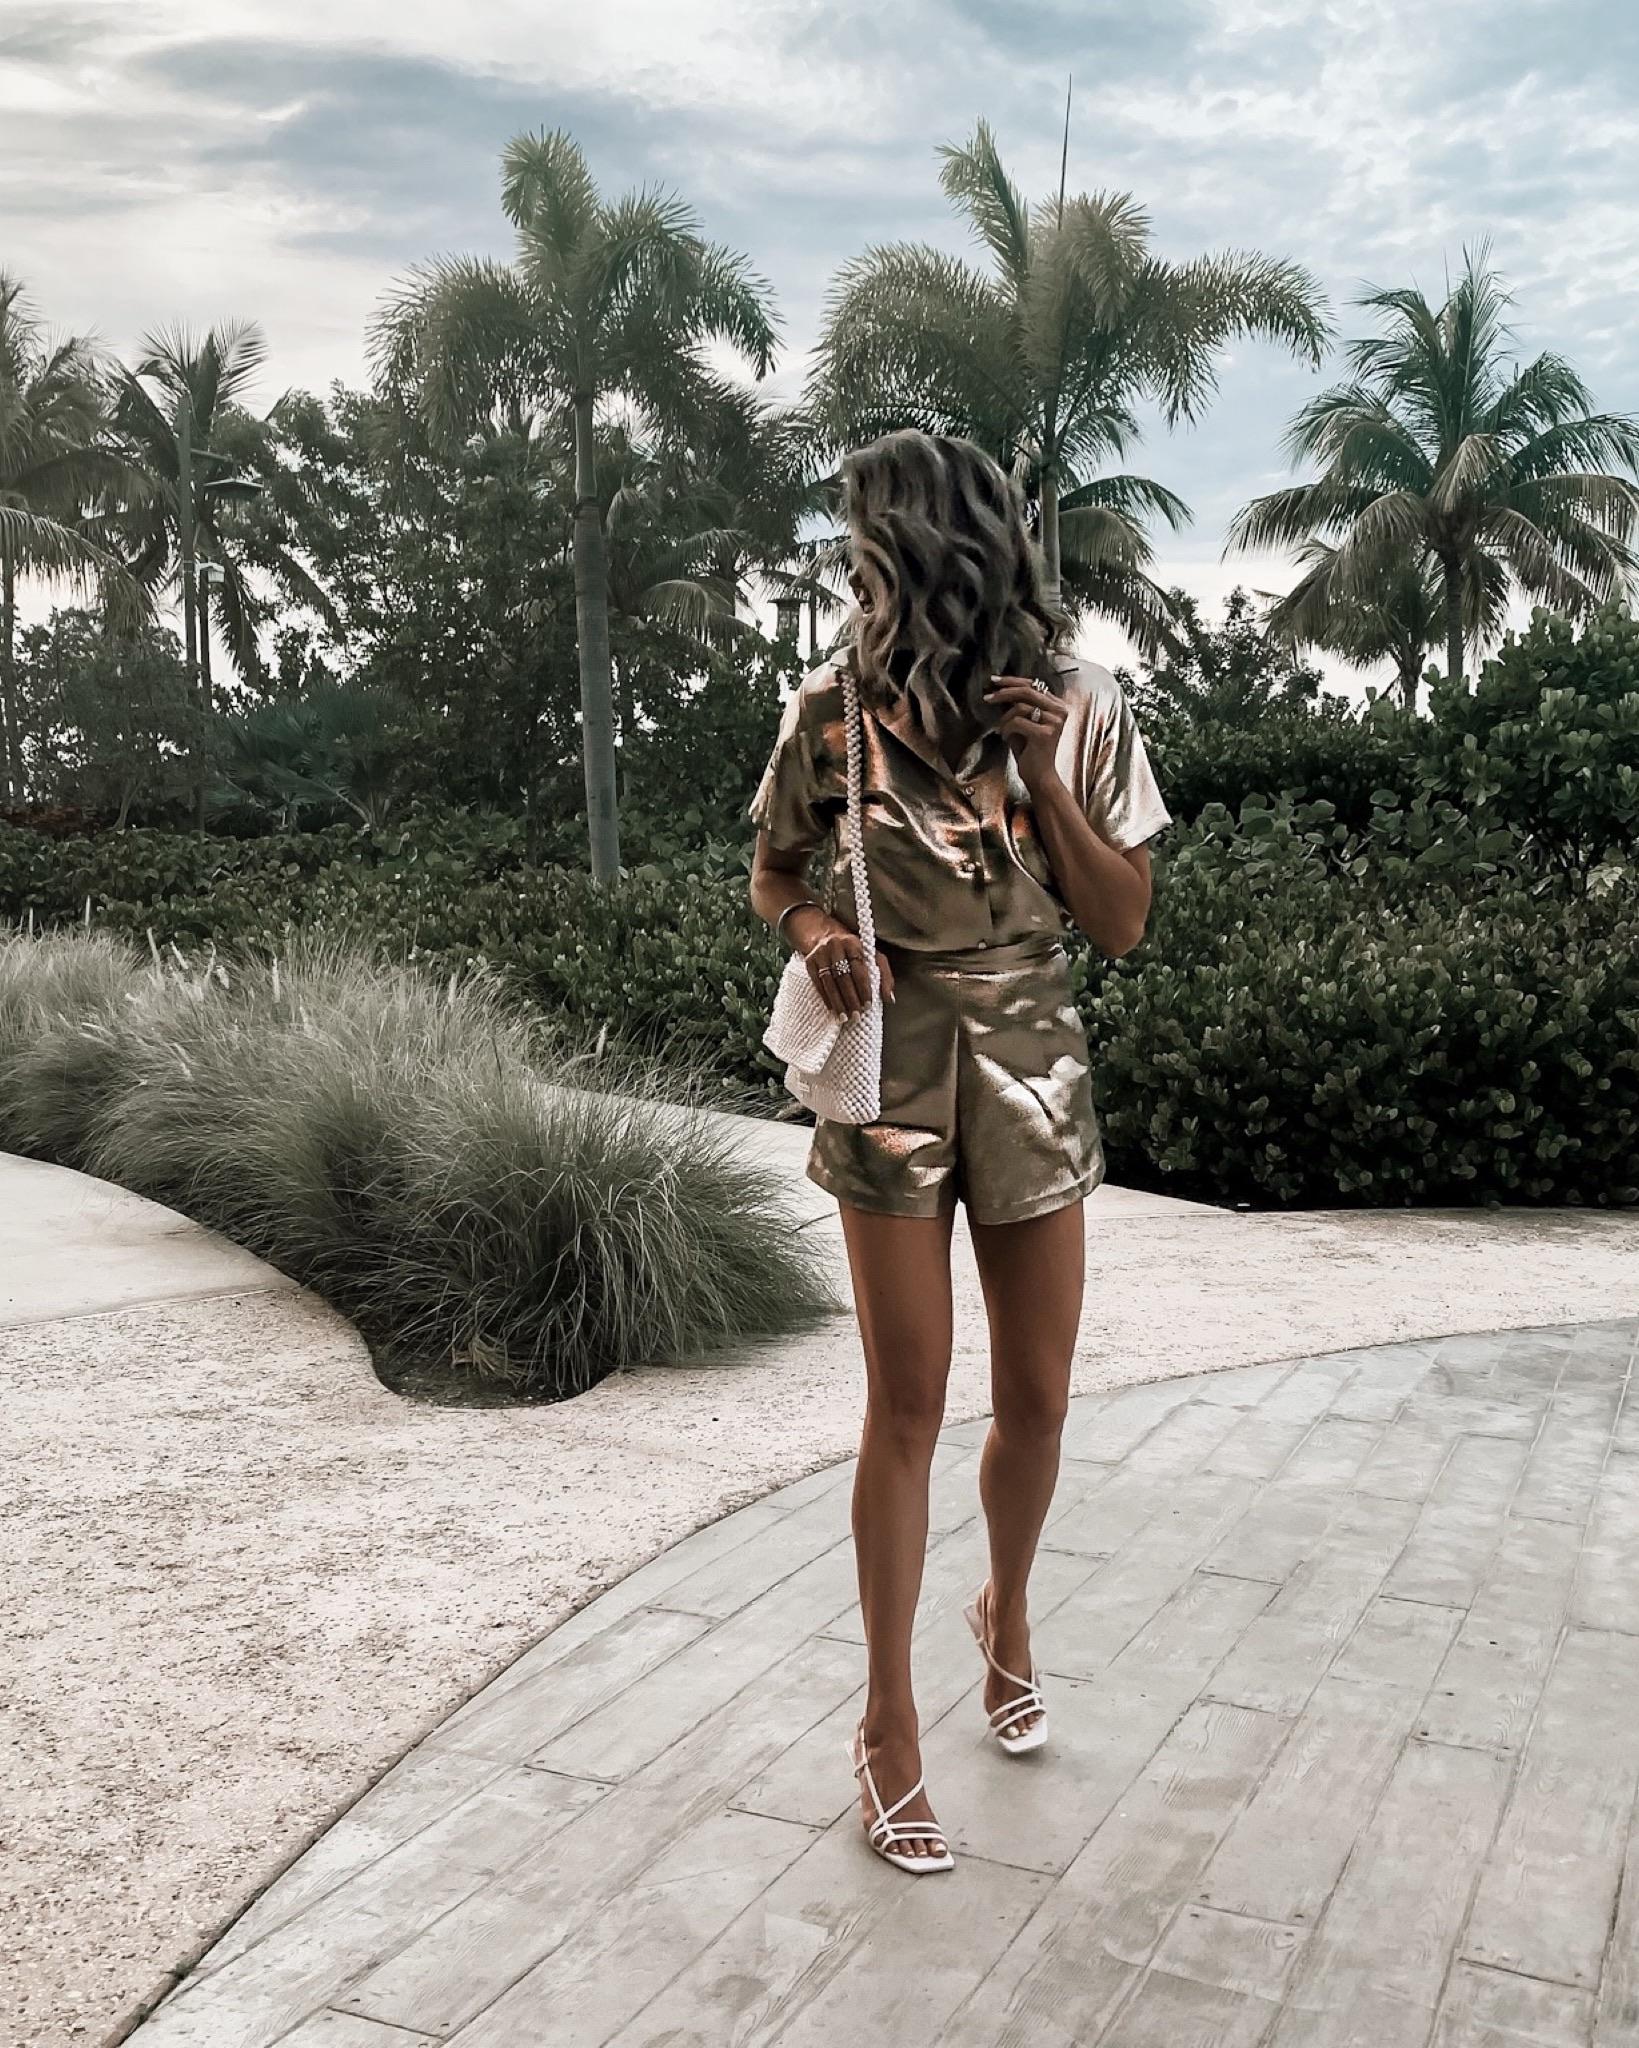 Style Blogger Life Lutzurious details her top Instagram posts and best sellers from the LiketoKnow.It app in her monthly hot list, including this shiny, old two piece set from Maje.